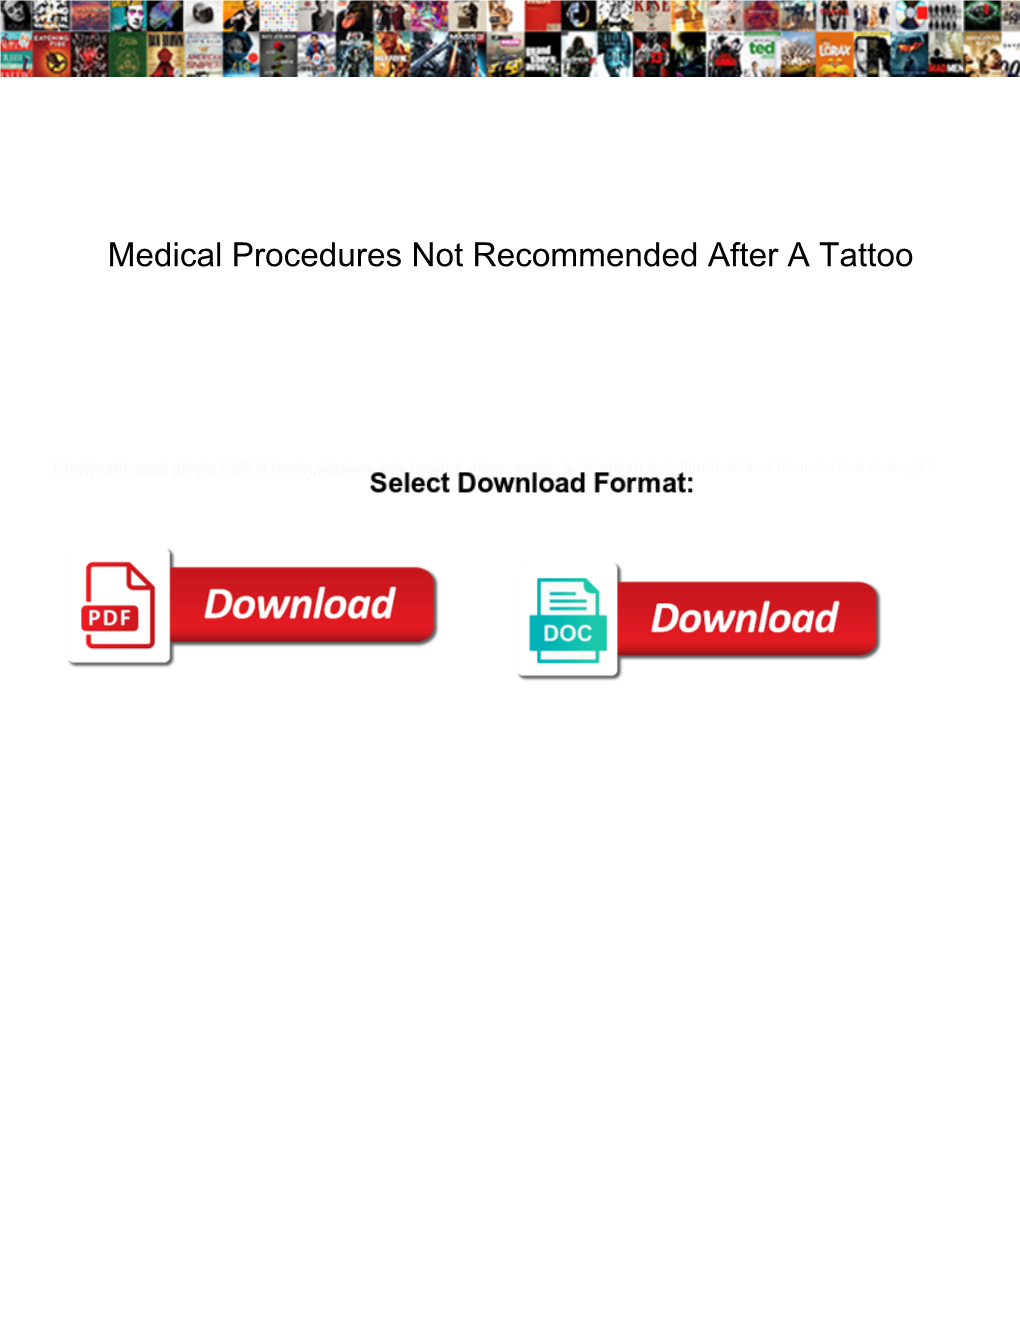 Medical Procedures Not Recommended After a Tattoo